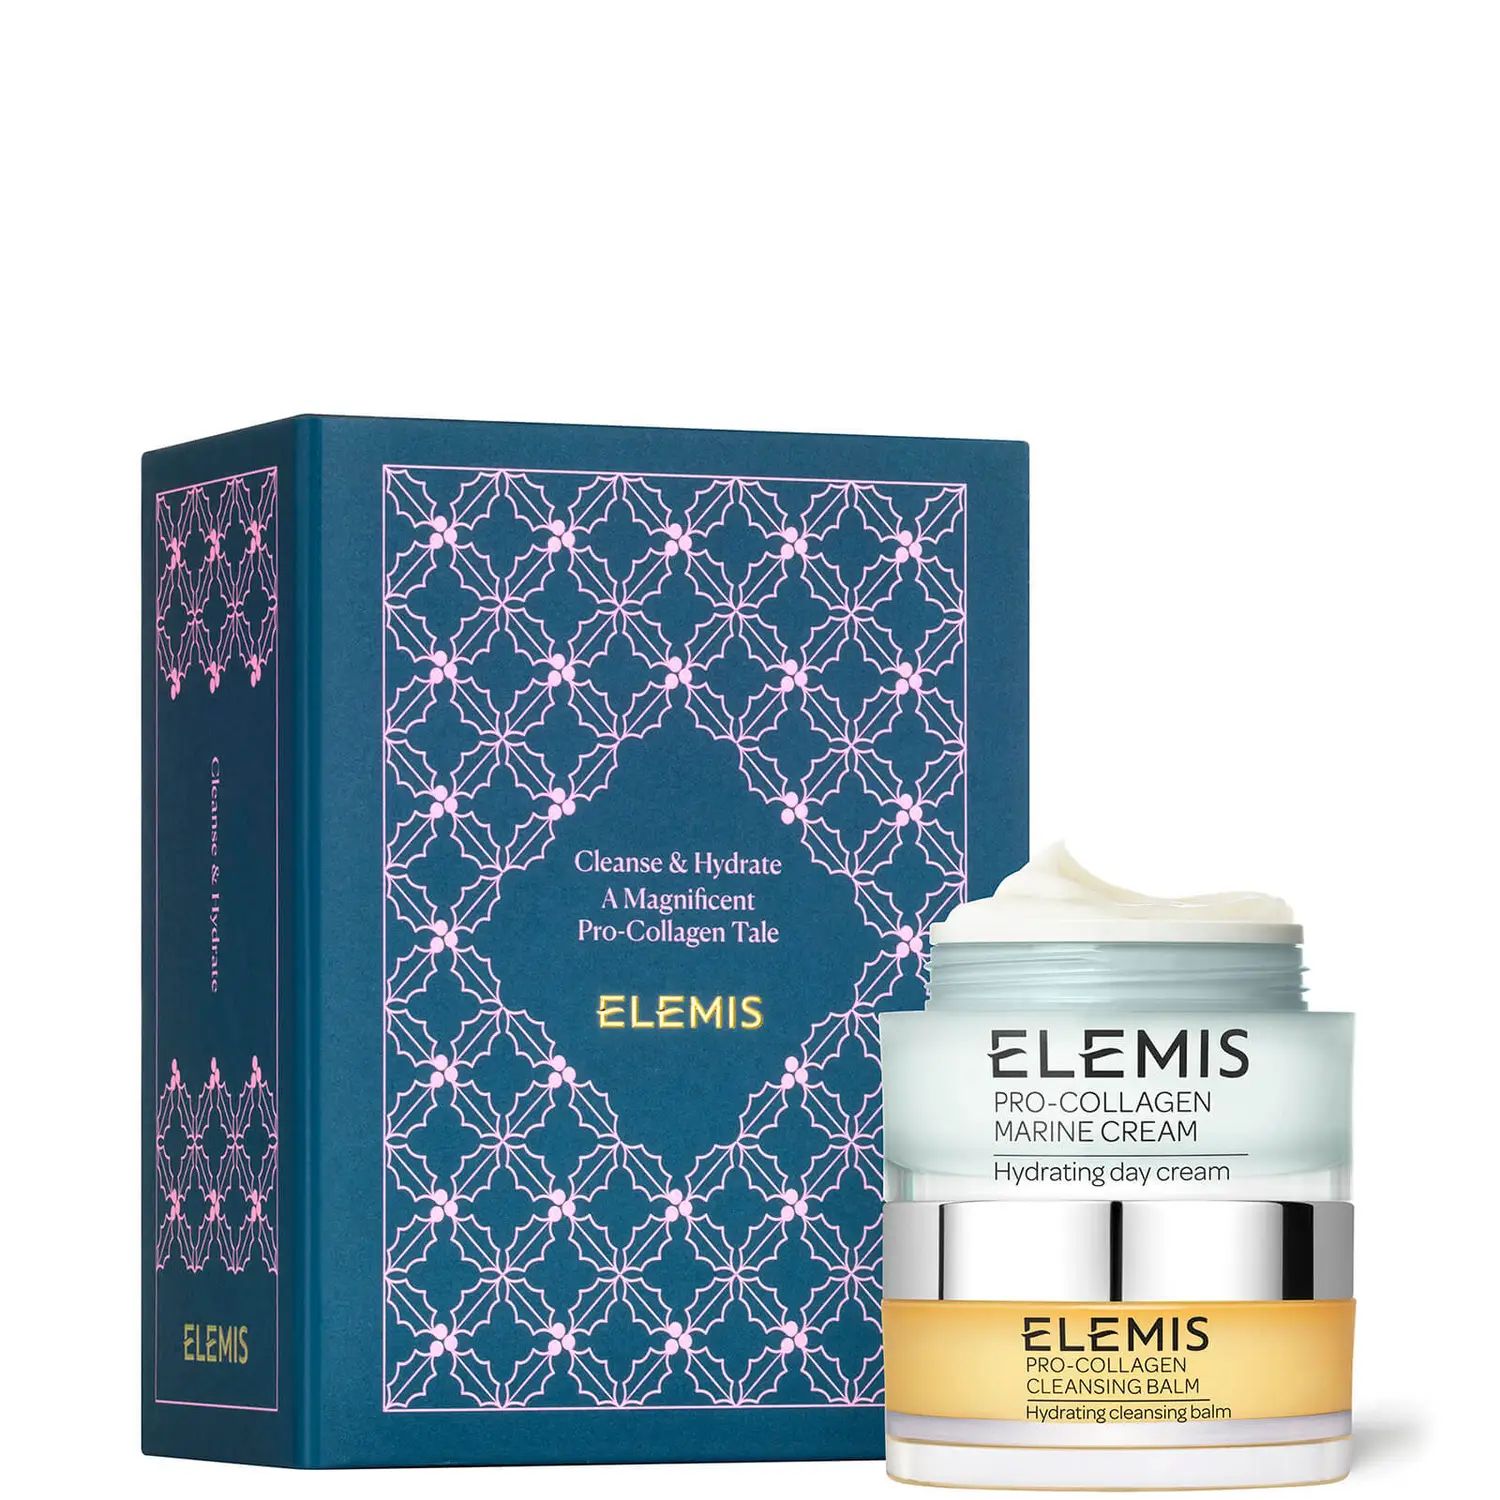 Elemis Cleanse and Hydrate A Magnificent Pro-Collagen Tale Set | Cult Beauty